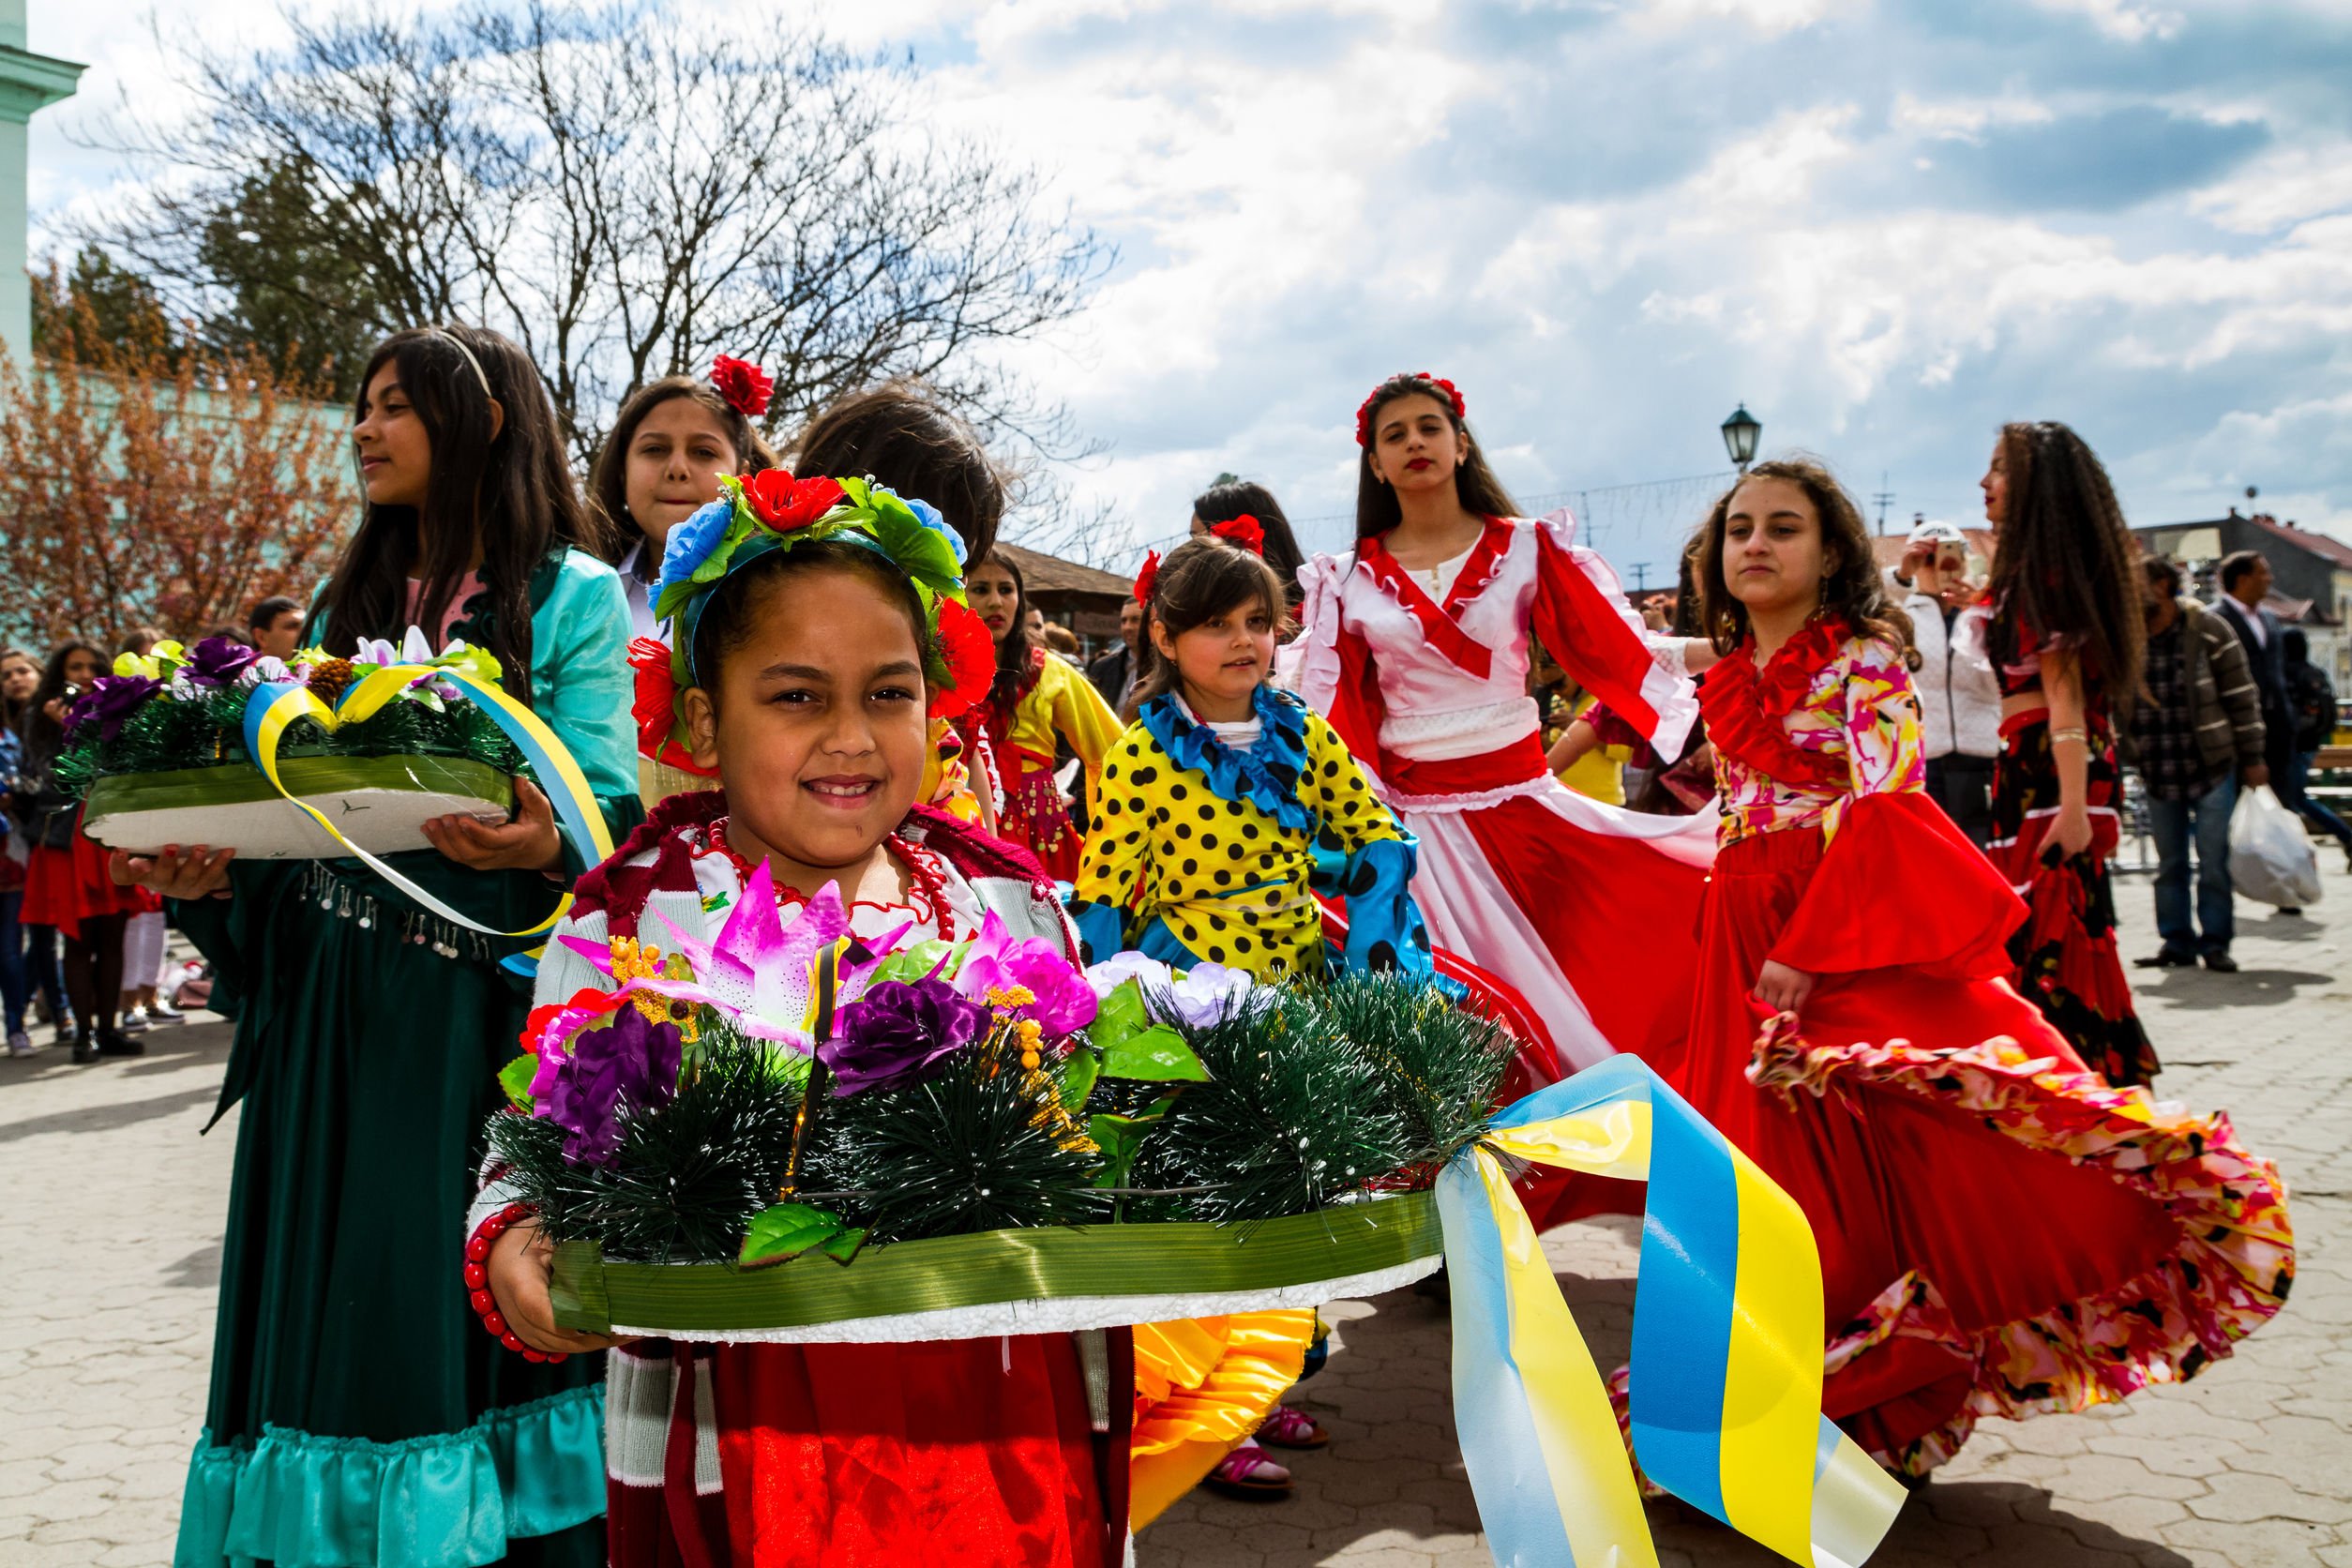 participants of the International Romani Day perform Romany folk dances in the city center